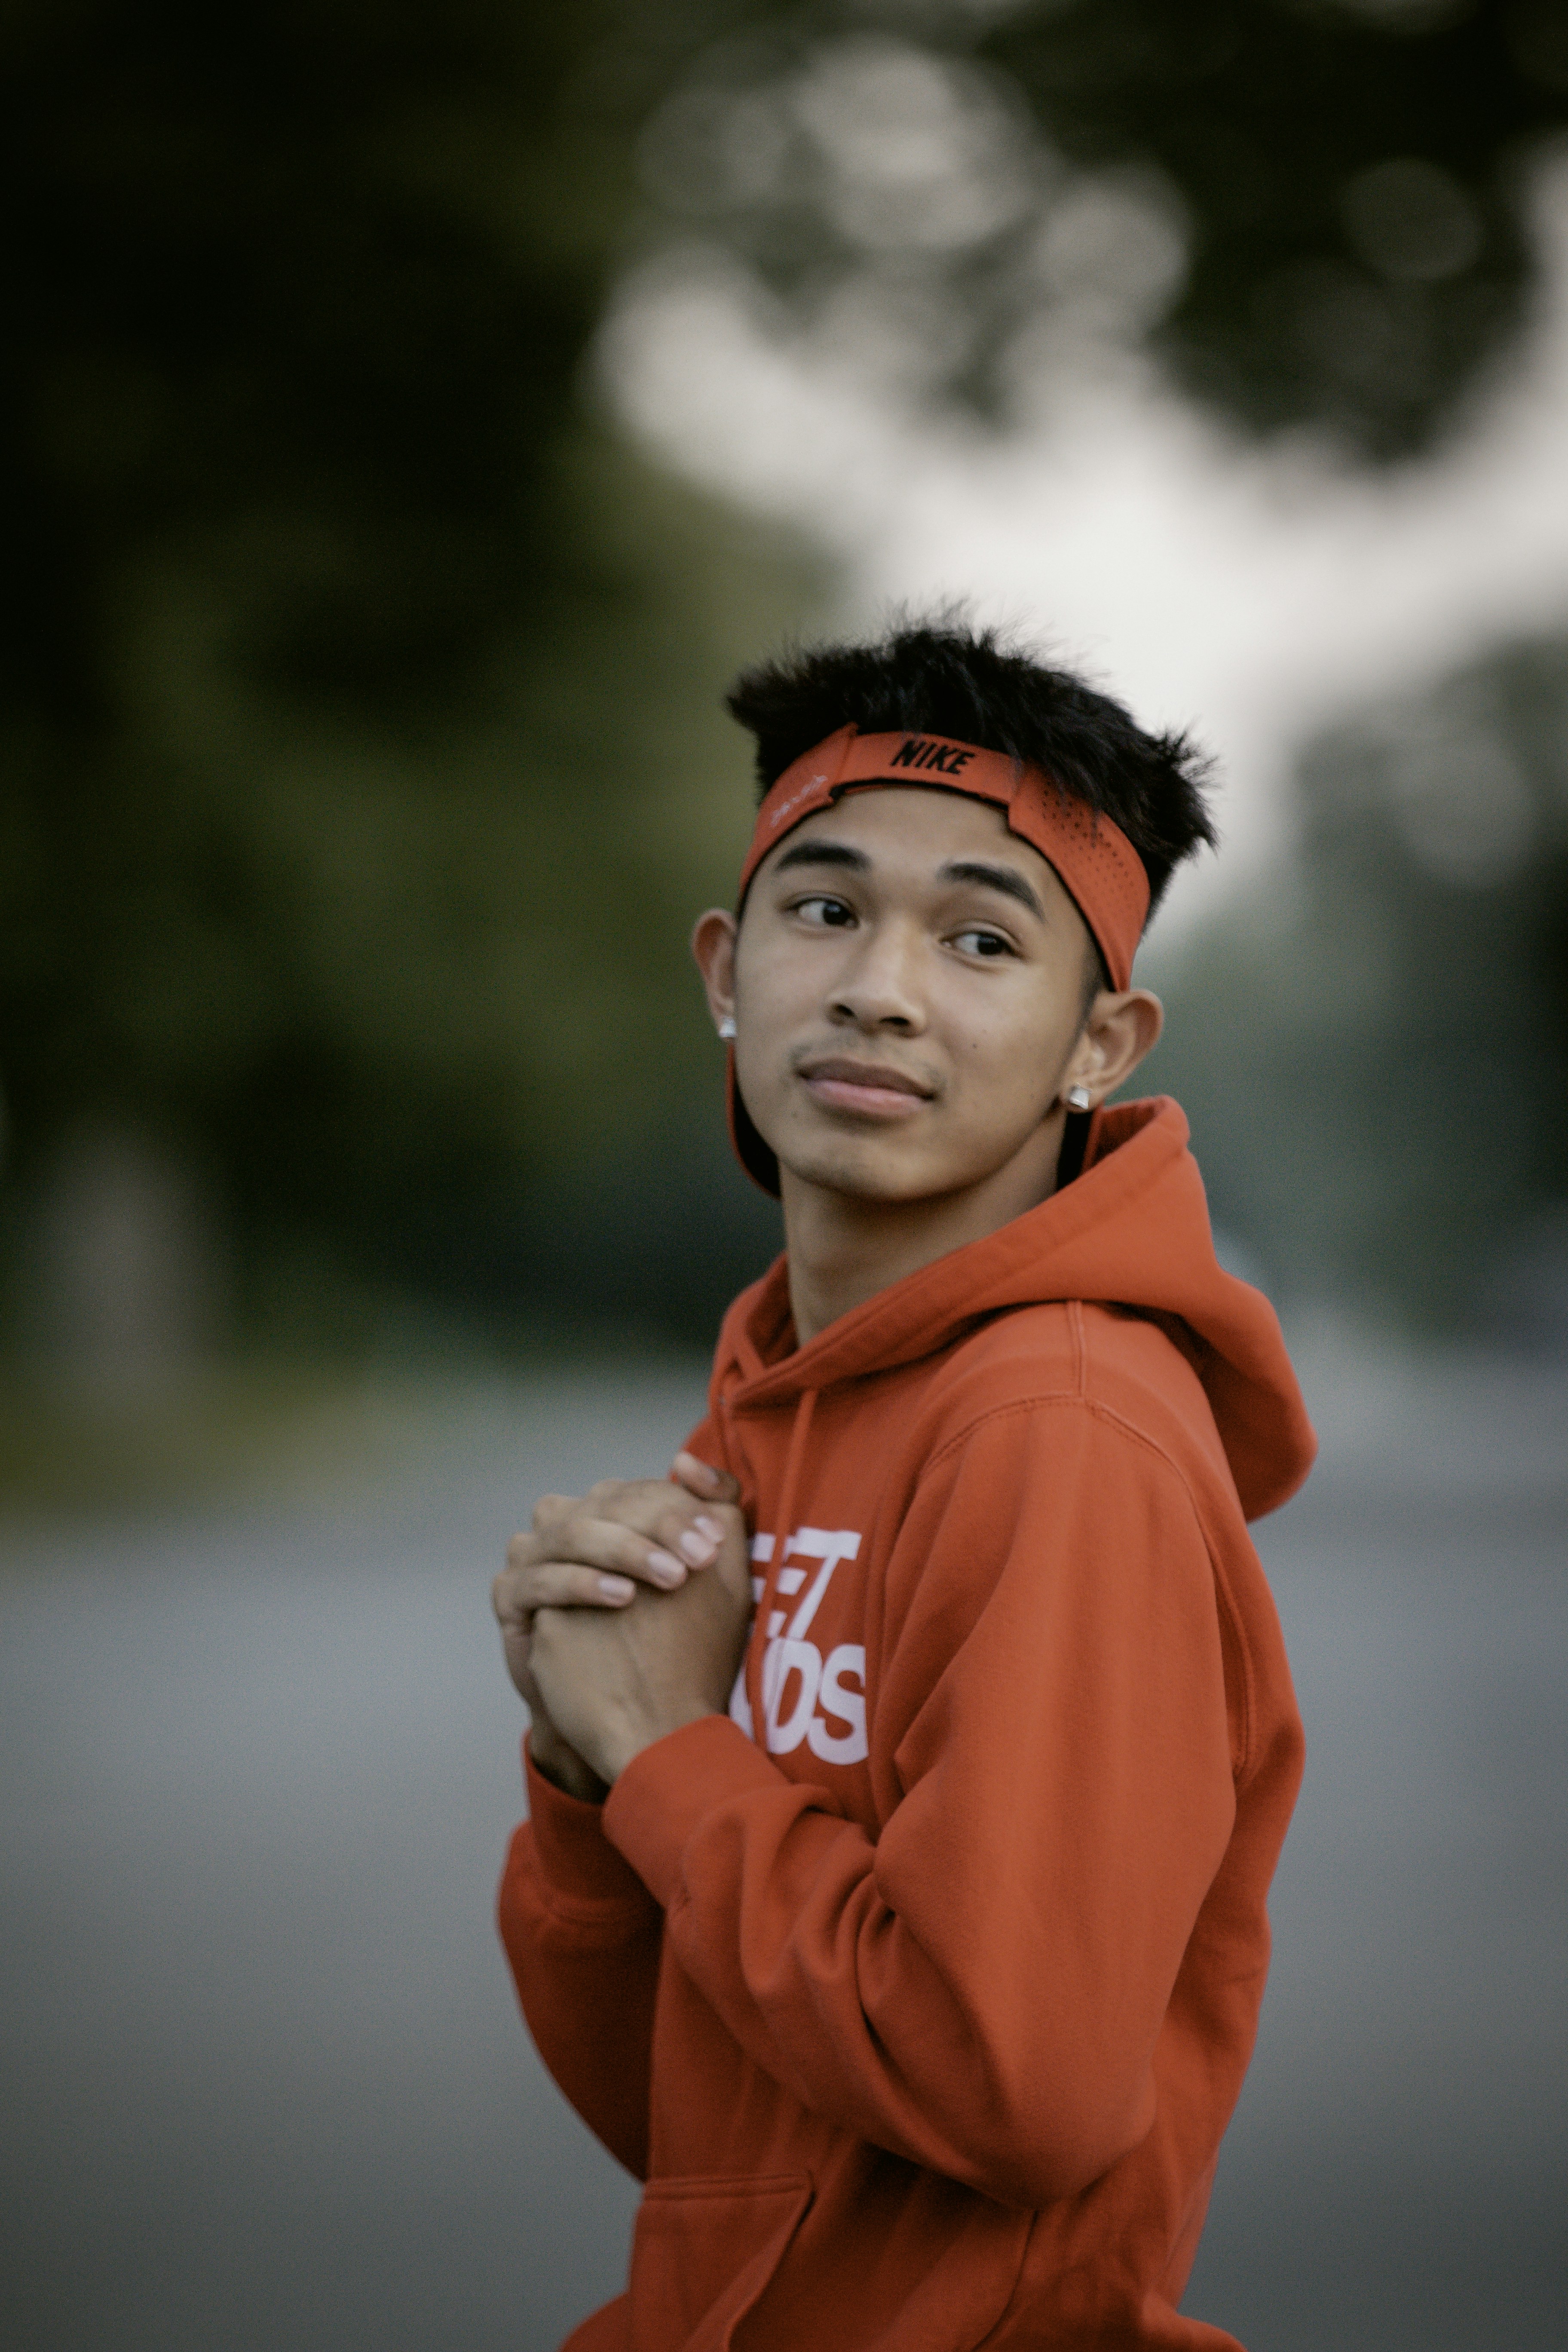 great photo recipe,how to photograph a young man in an orange hoodie is posing for a picture